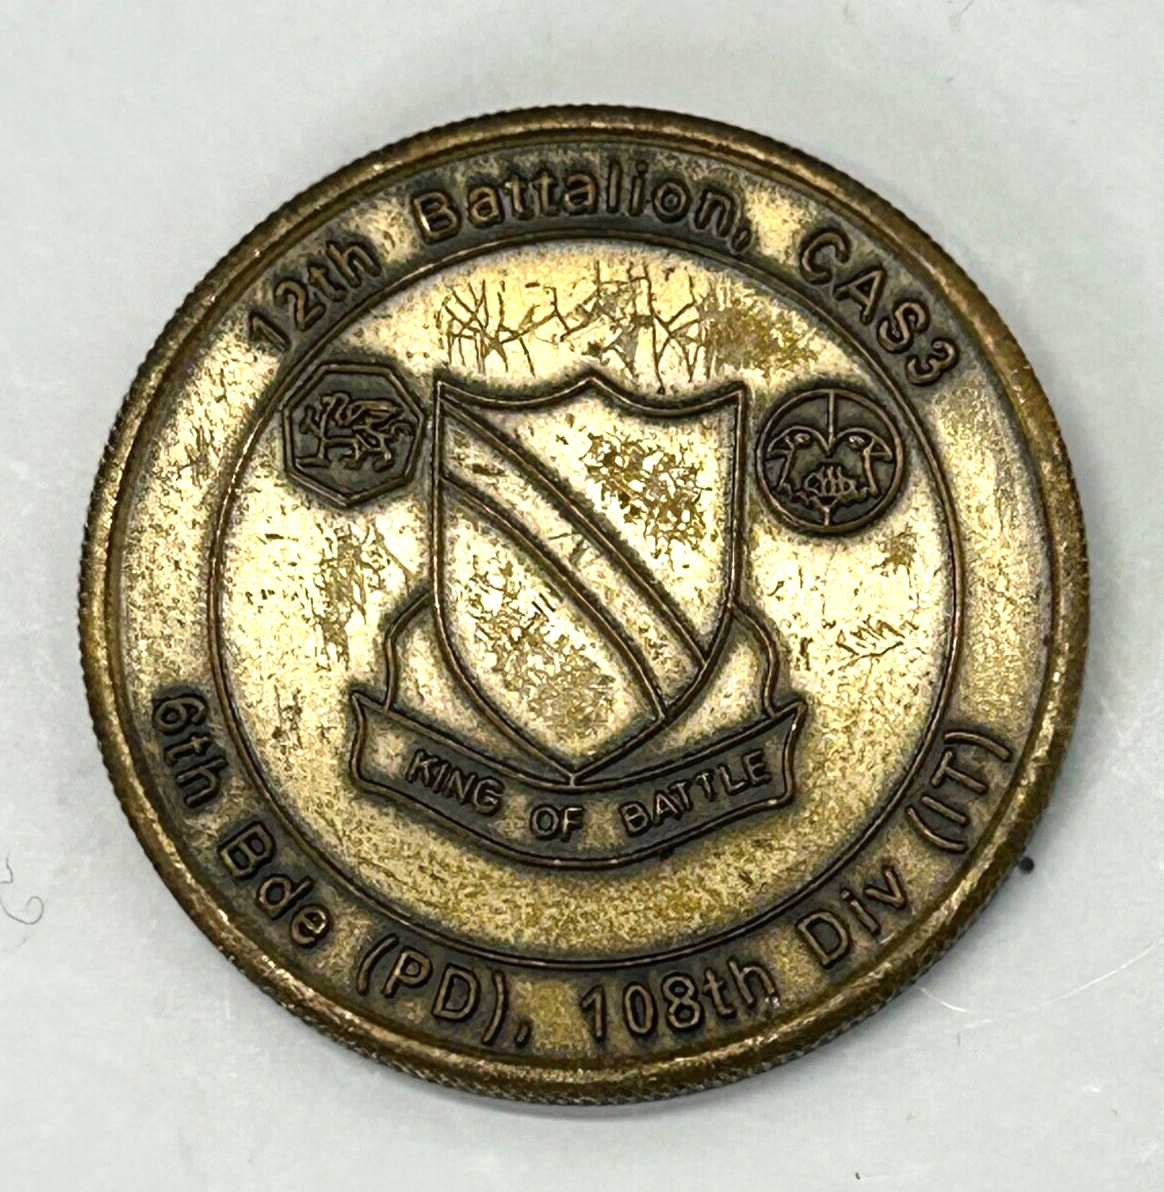 US Army 12th Battalion 6th BDE 108th Division Challenge Coin